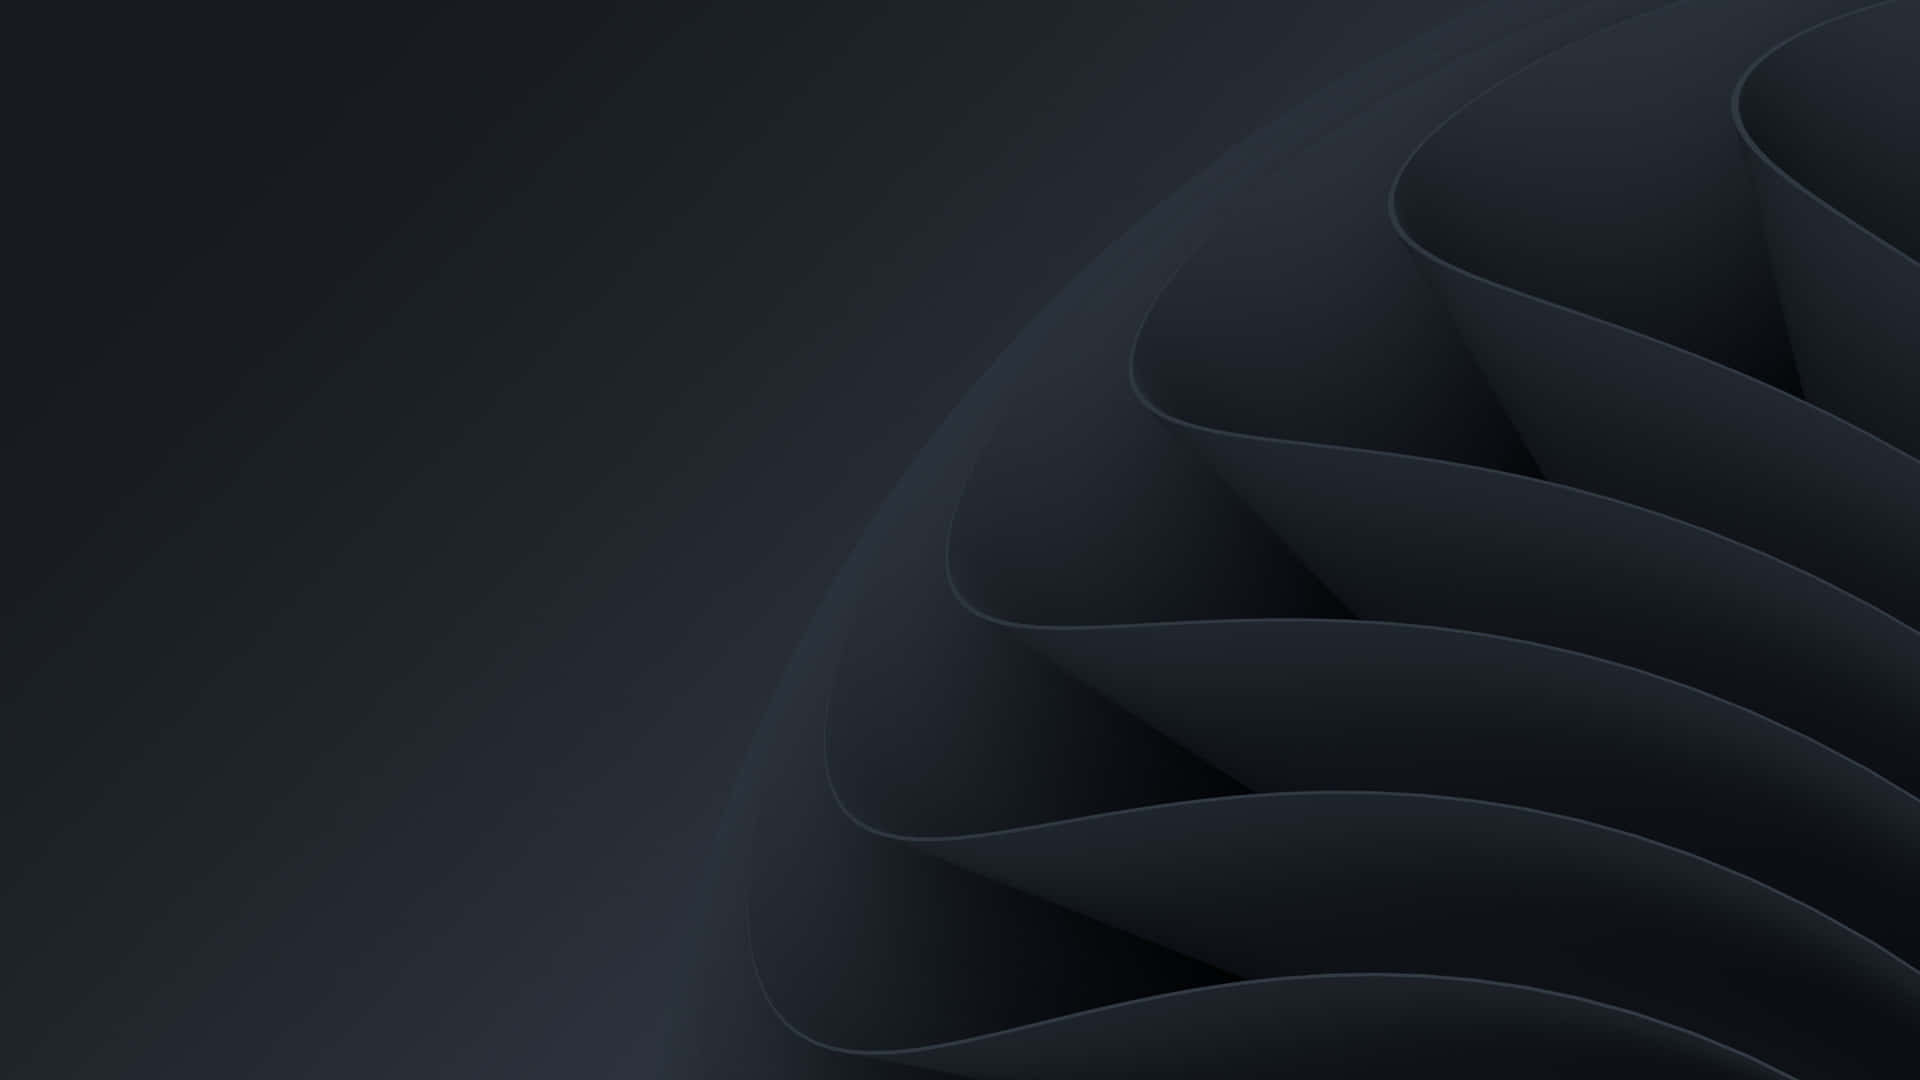 Black Abstract Background With A Spiral Shape